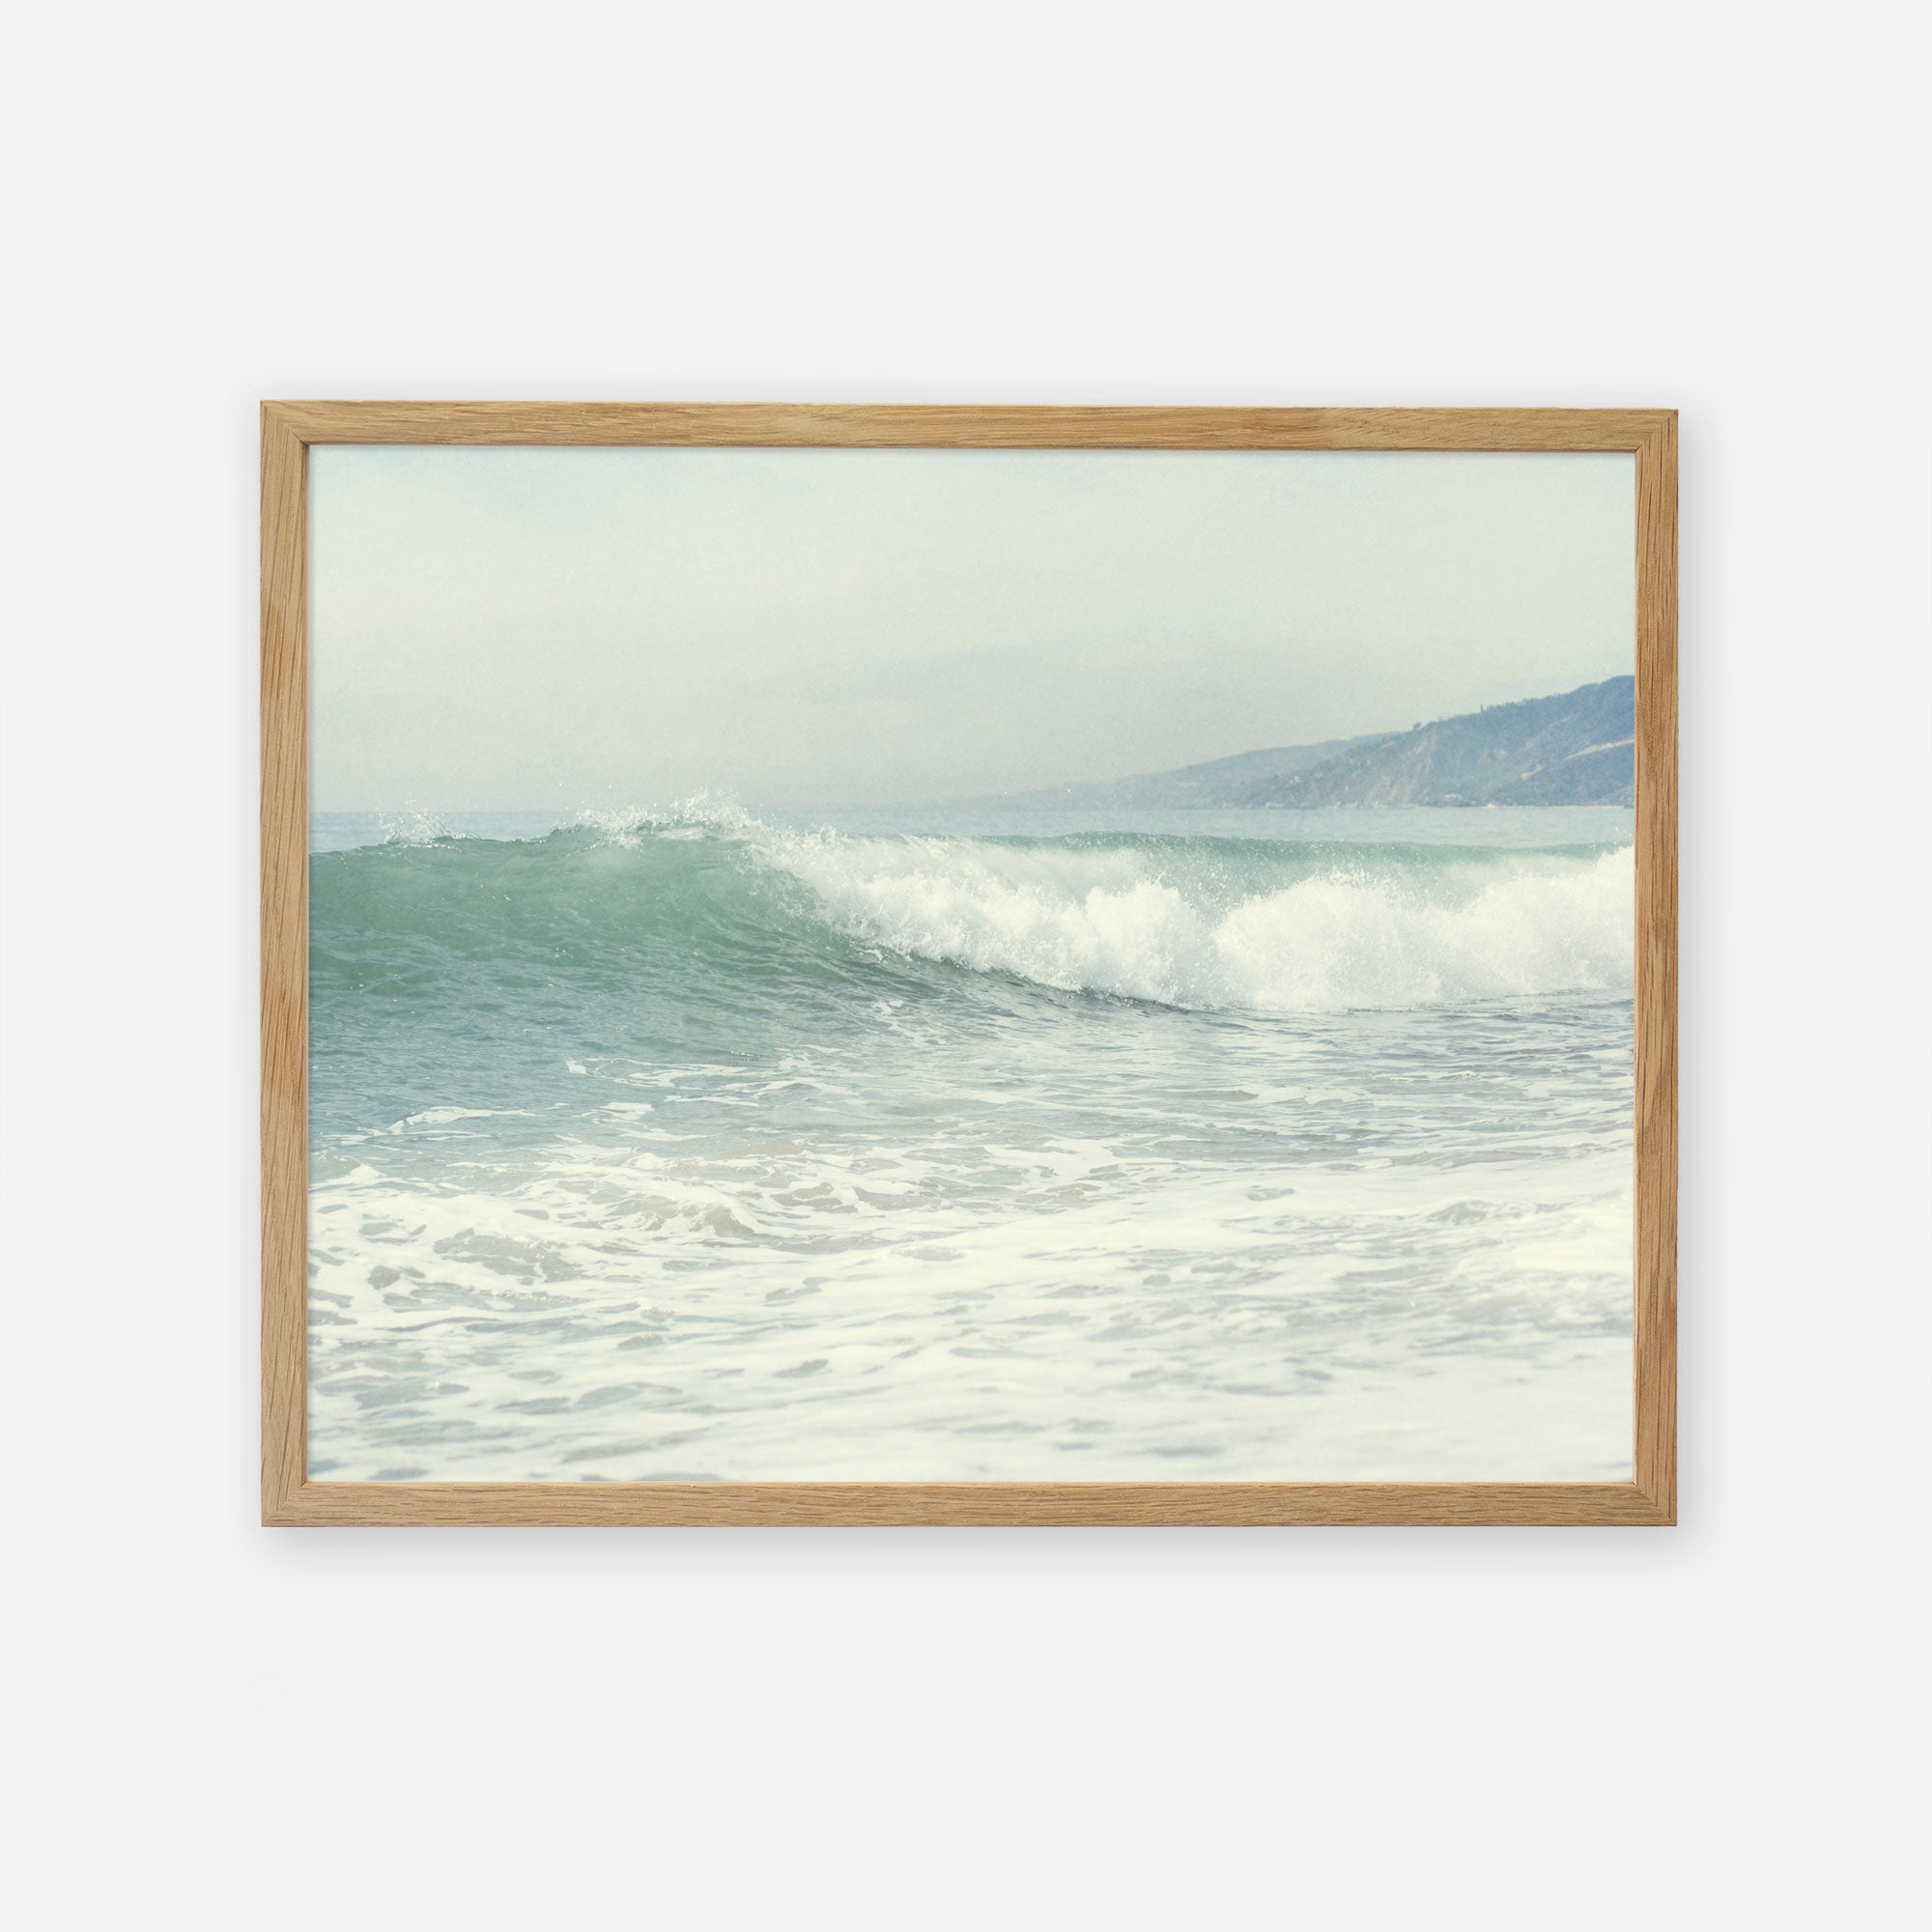 A framed painting of a calm Southern California beach scene with gentle waves and a hazy coastline in the background, giving a tranquil and serene vibe: Offley Green&#39;s Coastal Print of a Breaking Wave &#39;Breaking Surf&#39;